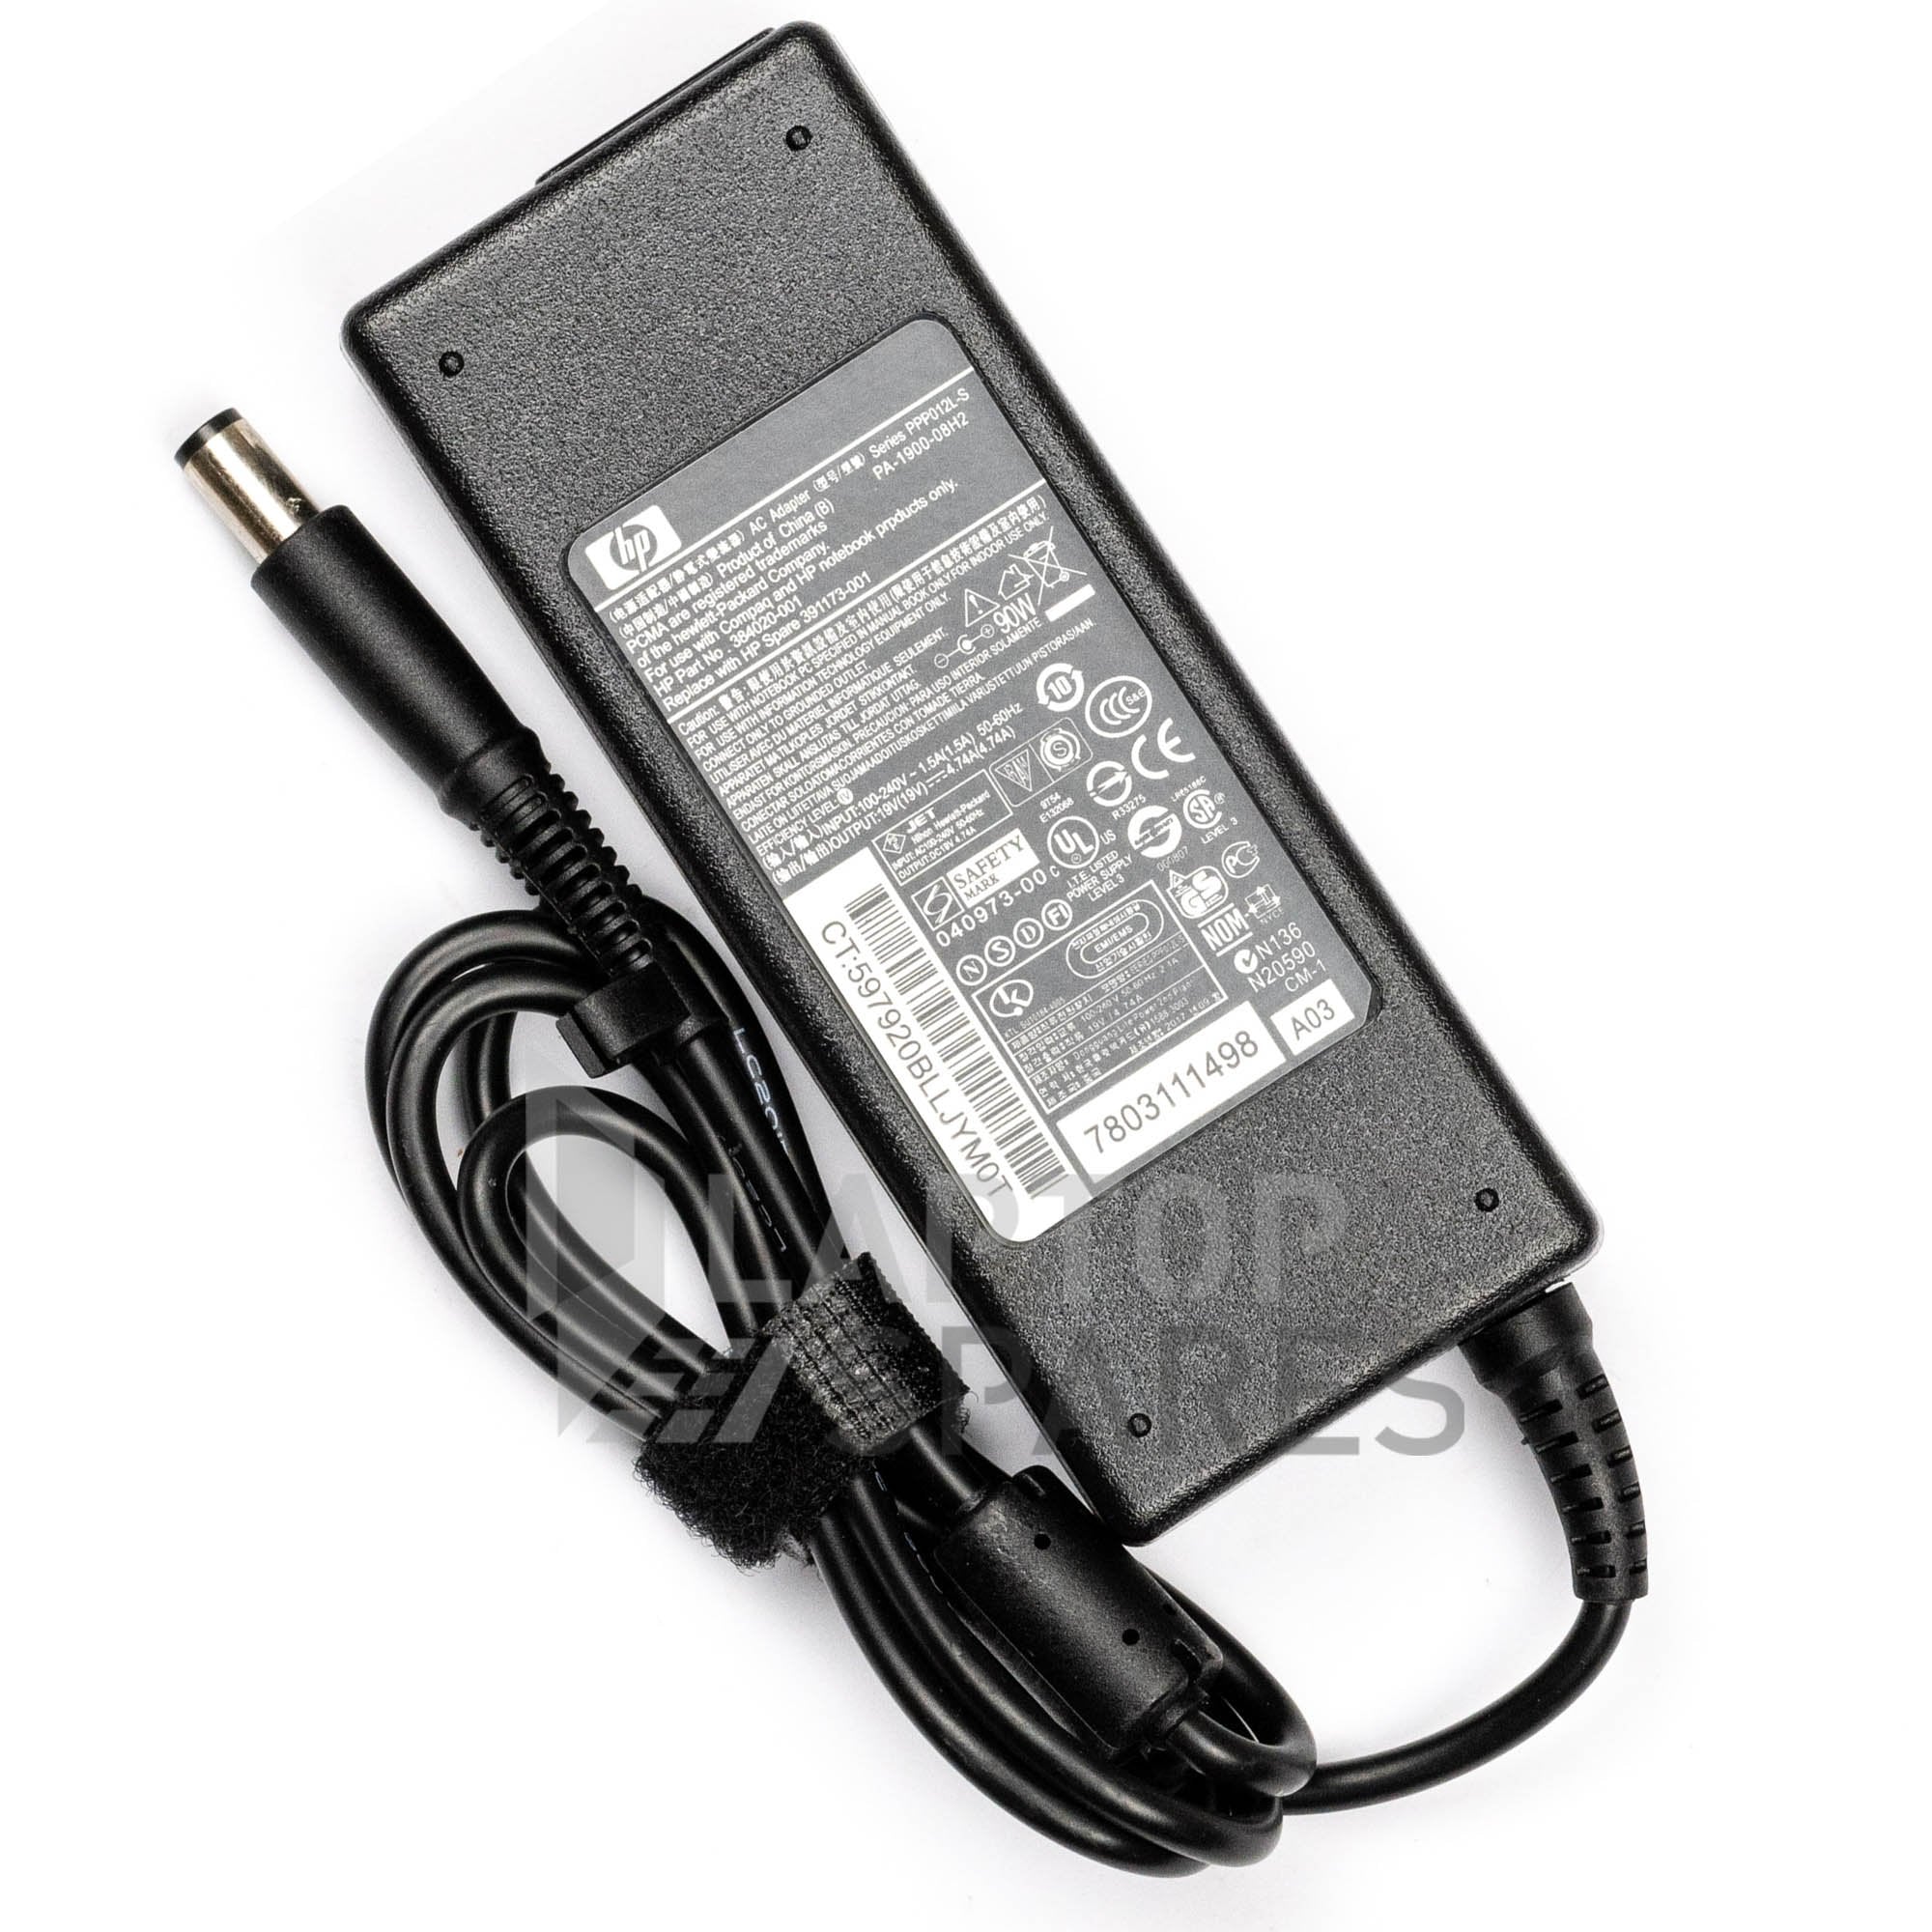 HP EliteBook 8470p 8470w Laptop AC Adapter Charger Price in Pakistan –  Laptop Spares